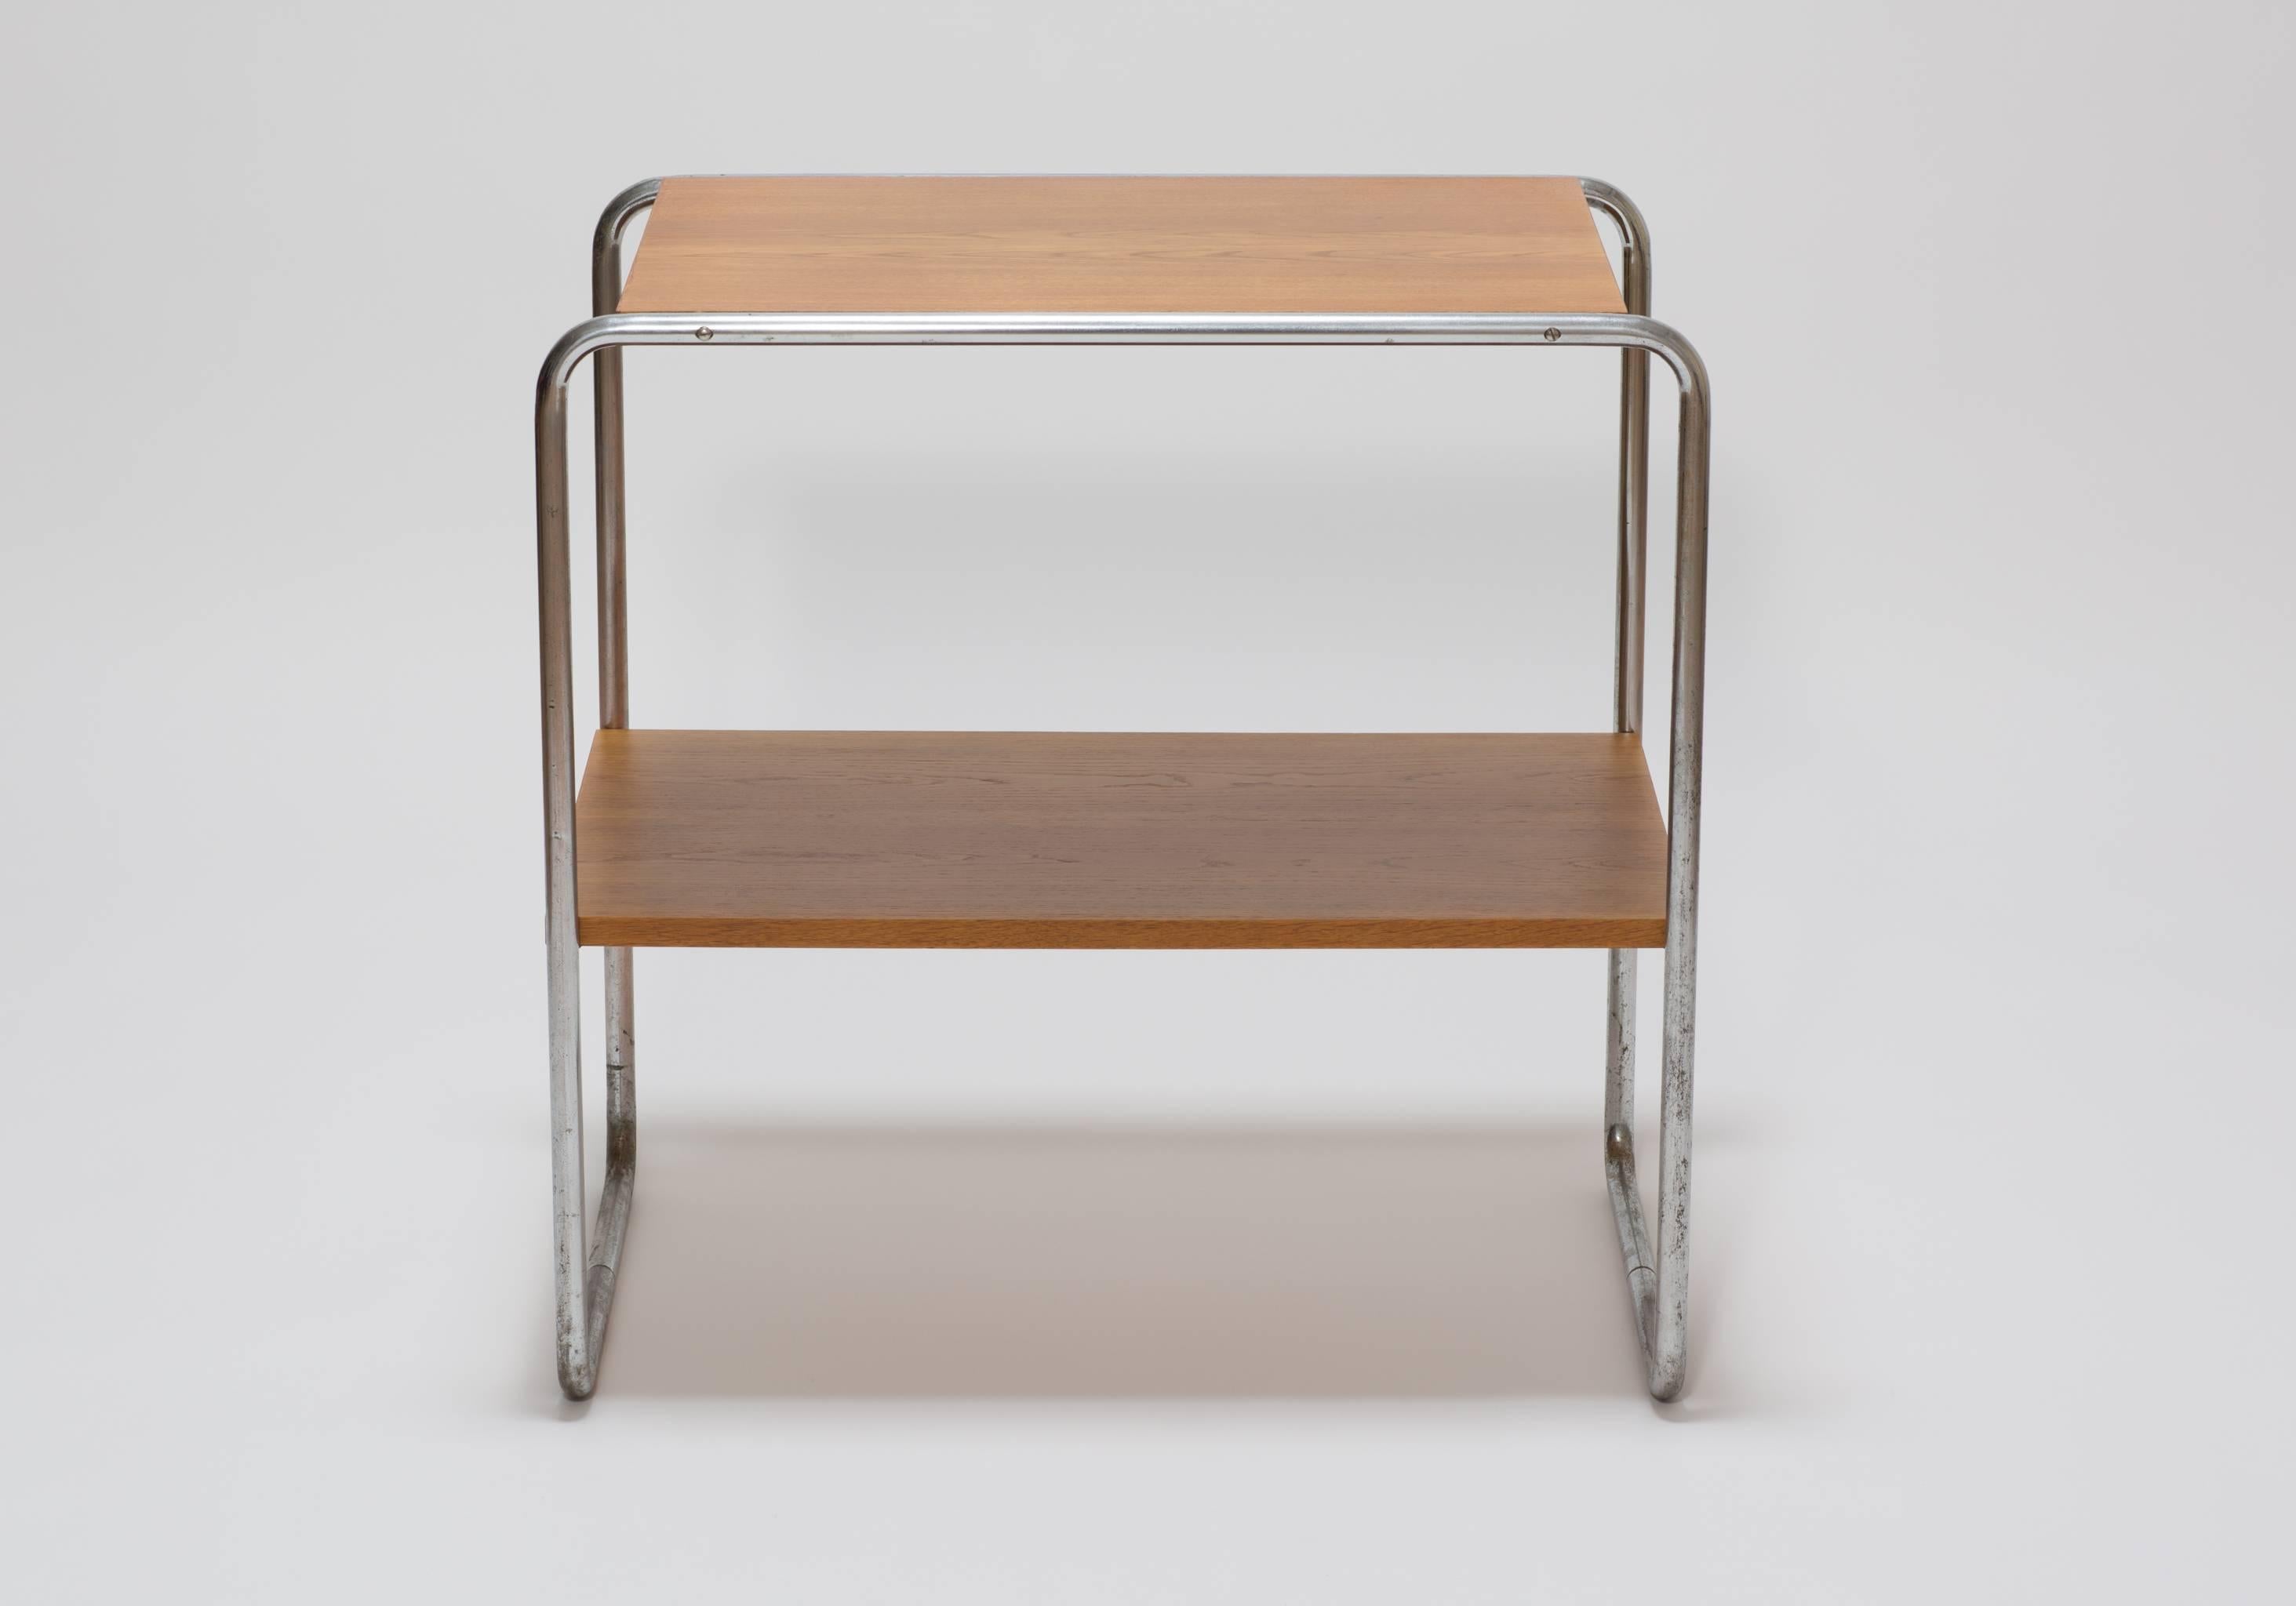 A shelf structure Bauhaus table model B20 designed by Marcel Breuer in 1928 and produced by Thonet between 1930 and 1940. The side table has a chrome-plated tubular steel frame and two oak boards.

The table would make an eye-catching addition to